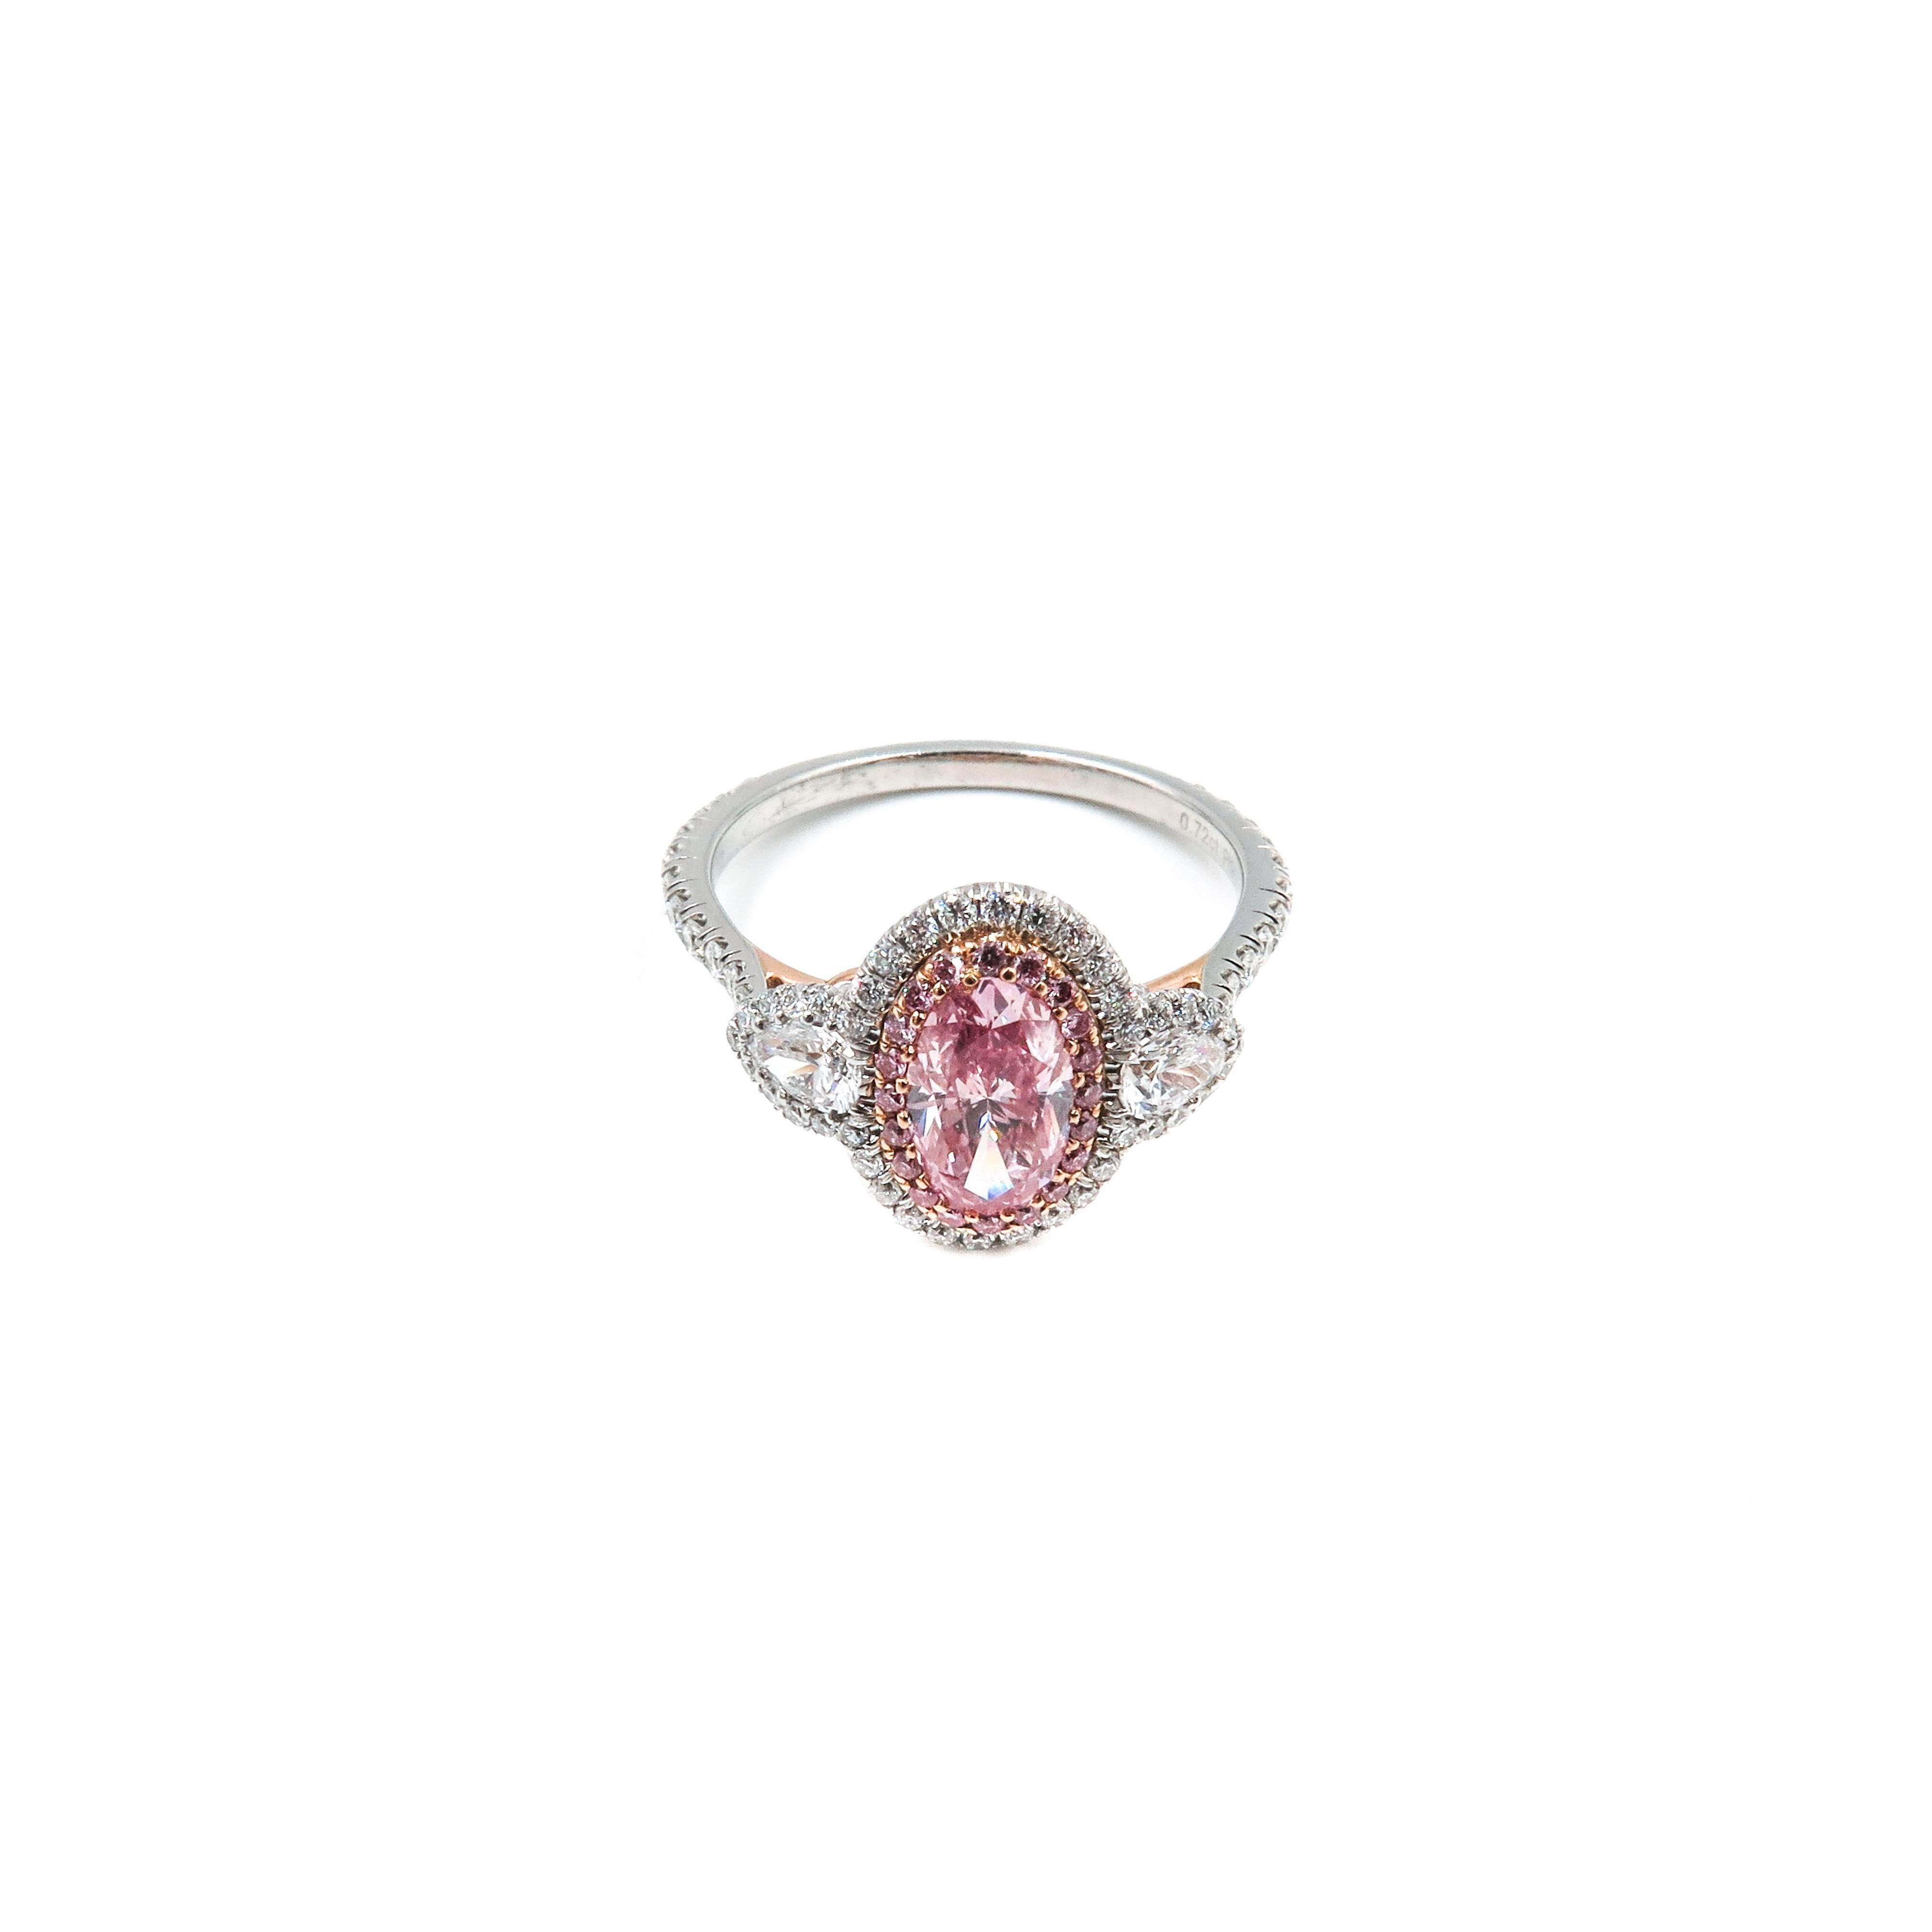 Amazing...  journeying from the crucible of the earth, emerges the most intriguing diamond in history. Revered for its exquisite beauty, the Argyle pink diamond is coveted as the most esteemed diamond in the world.
Located in the East Kimberley